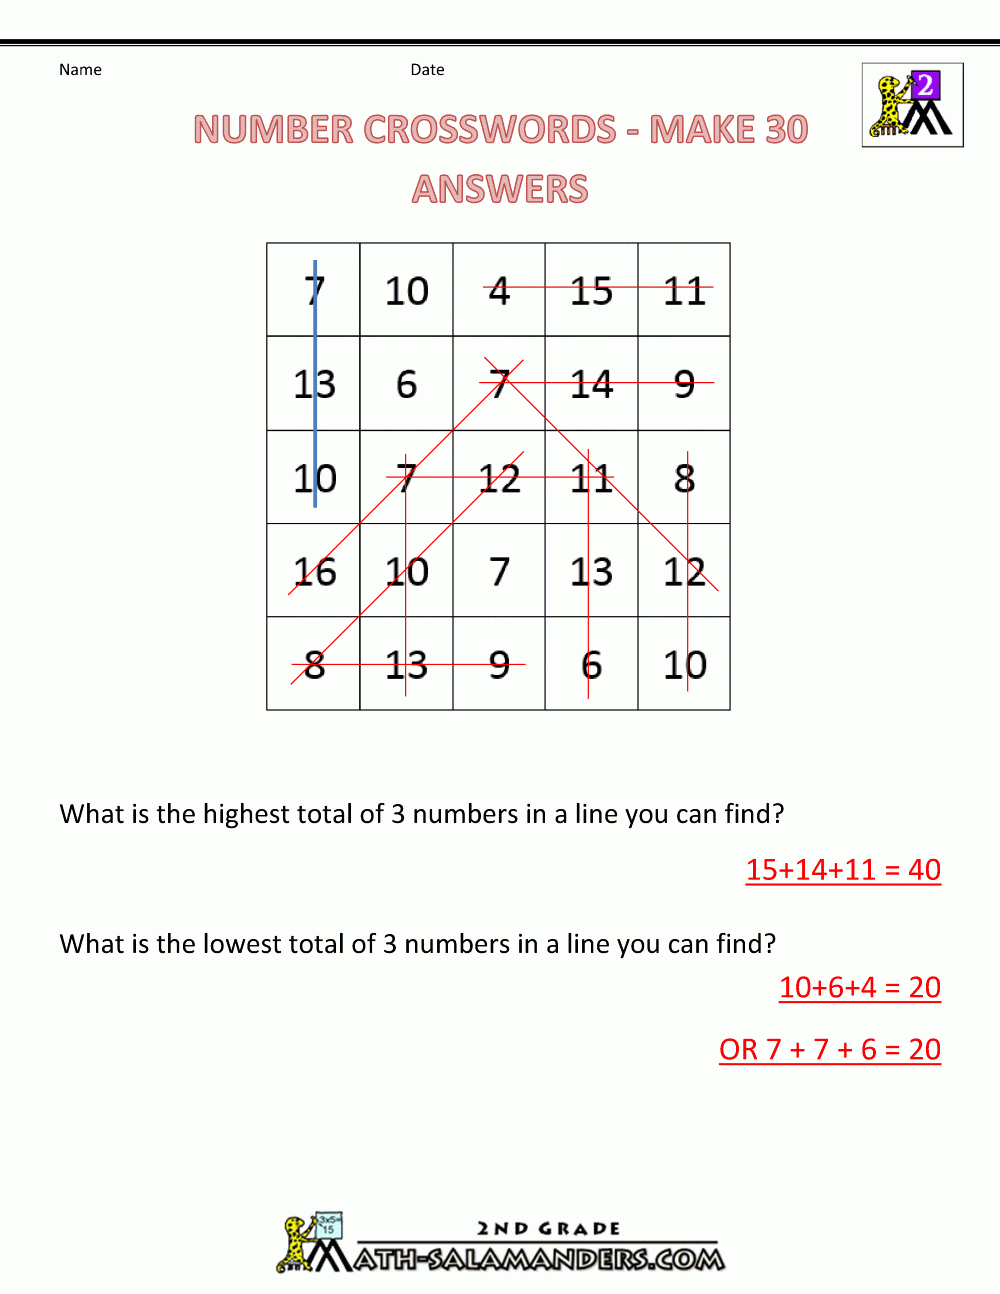 Free Math Puzzles - Addition And Subtraction - Printable Addition Puzzles